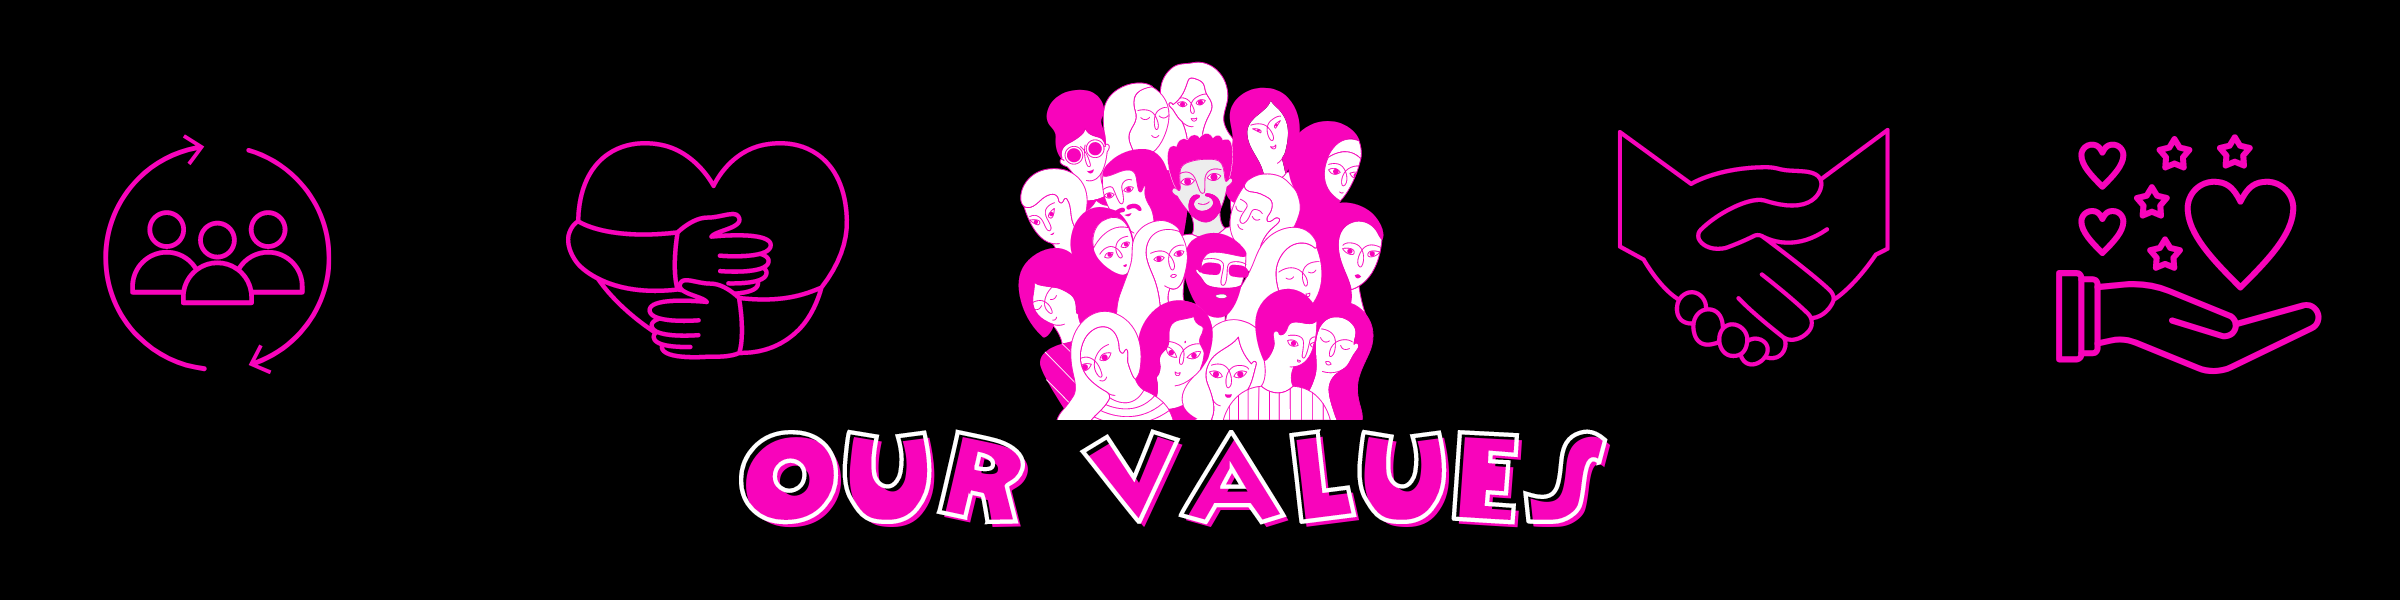 Our Values & Purpose 